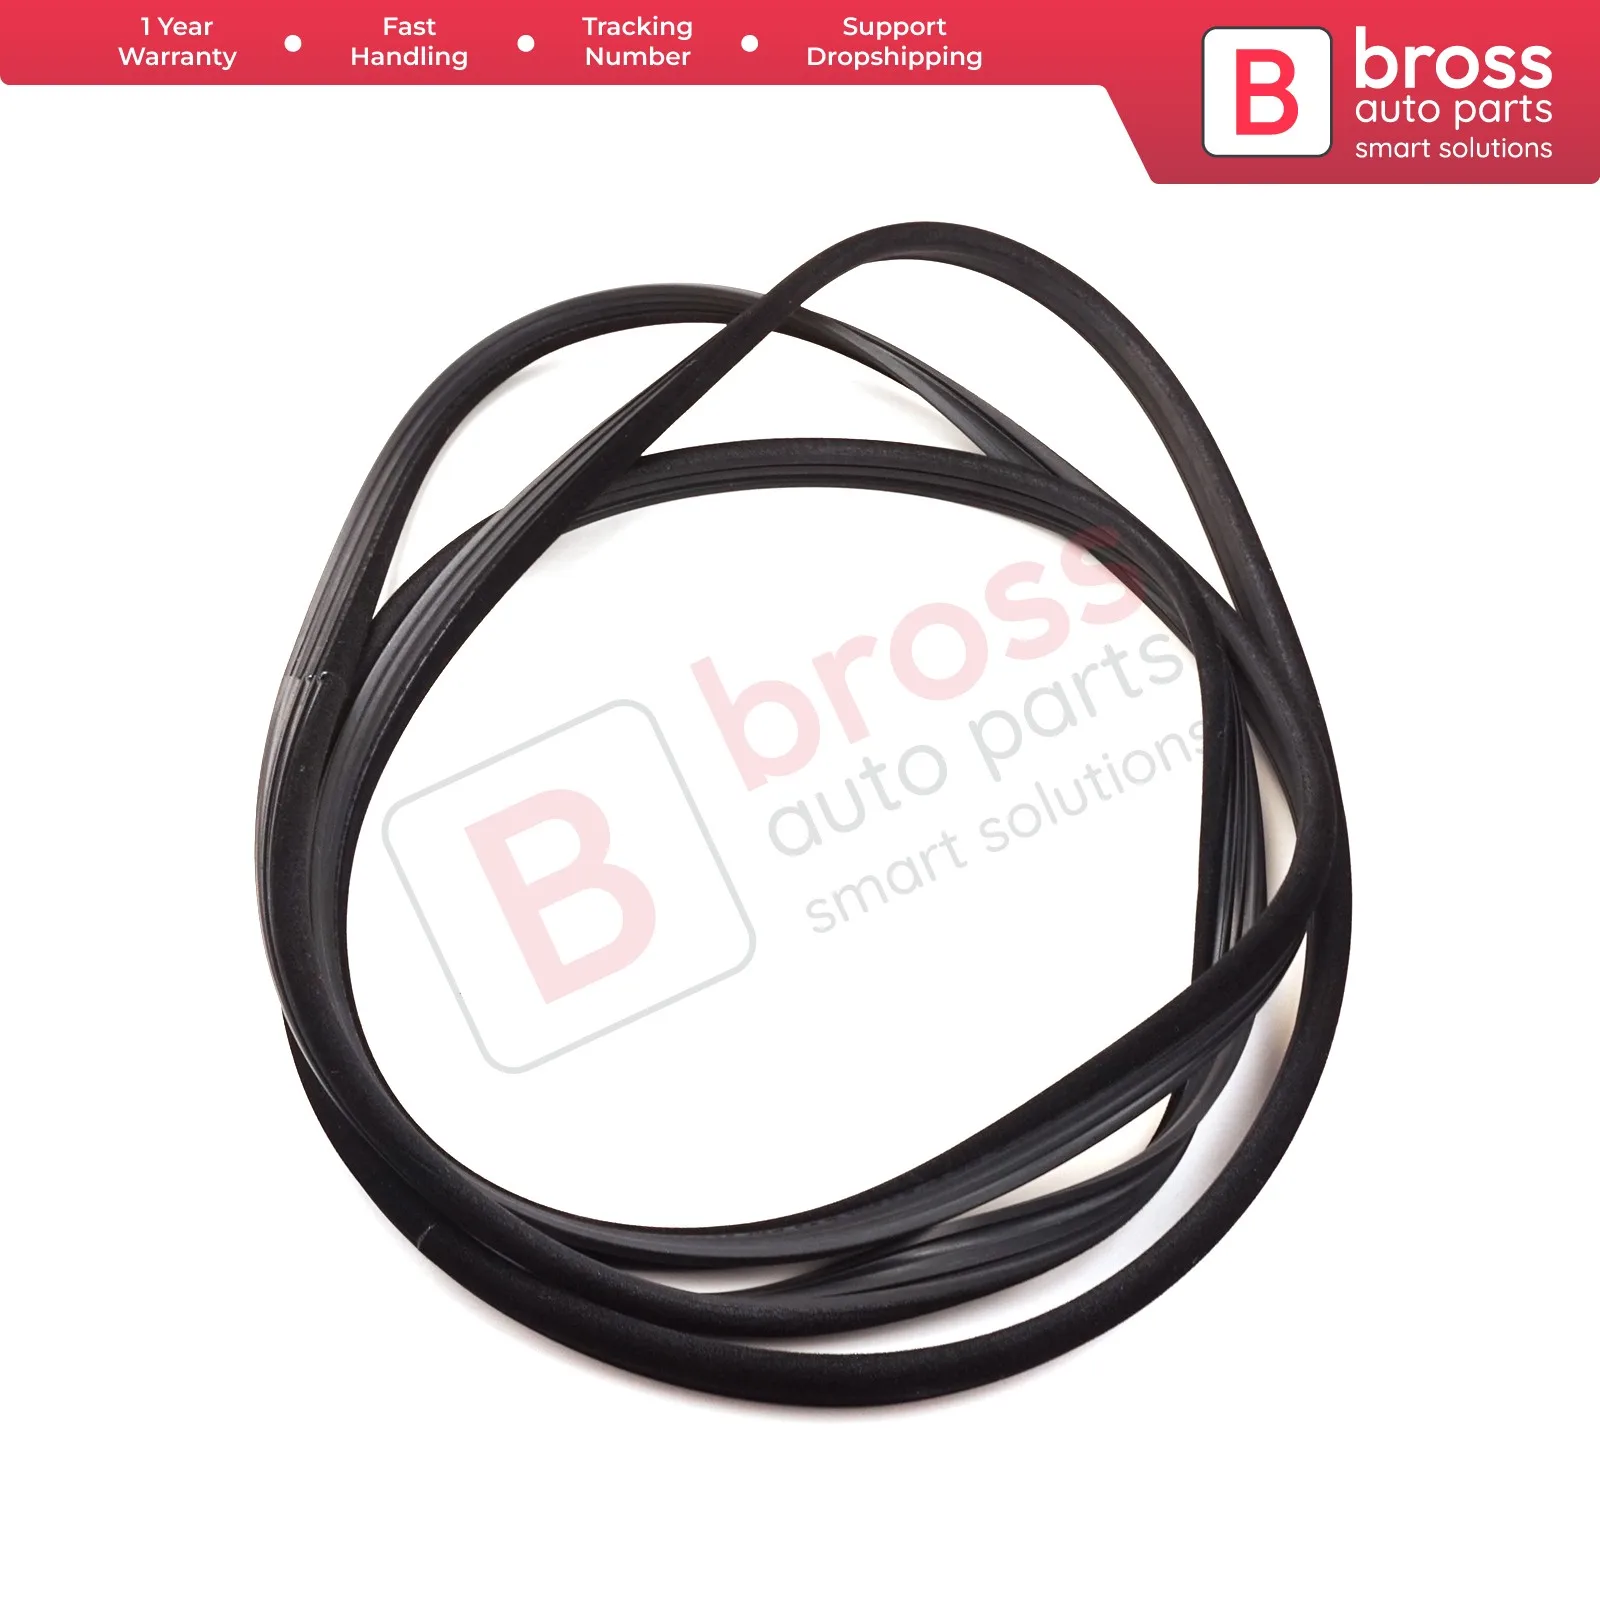 

Bross Auto Parts BSR550 Sunroof Sliding Seal A1247800298 for Mercedes W124 W201 W202 W203 Fast Shipment Ship From Turkey